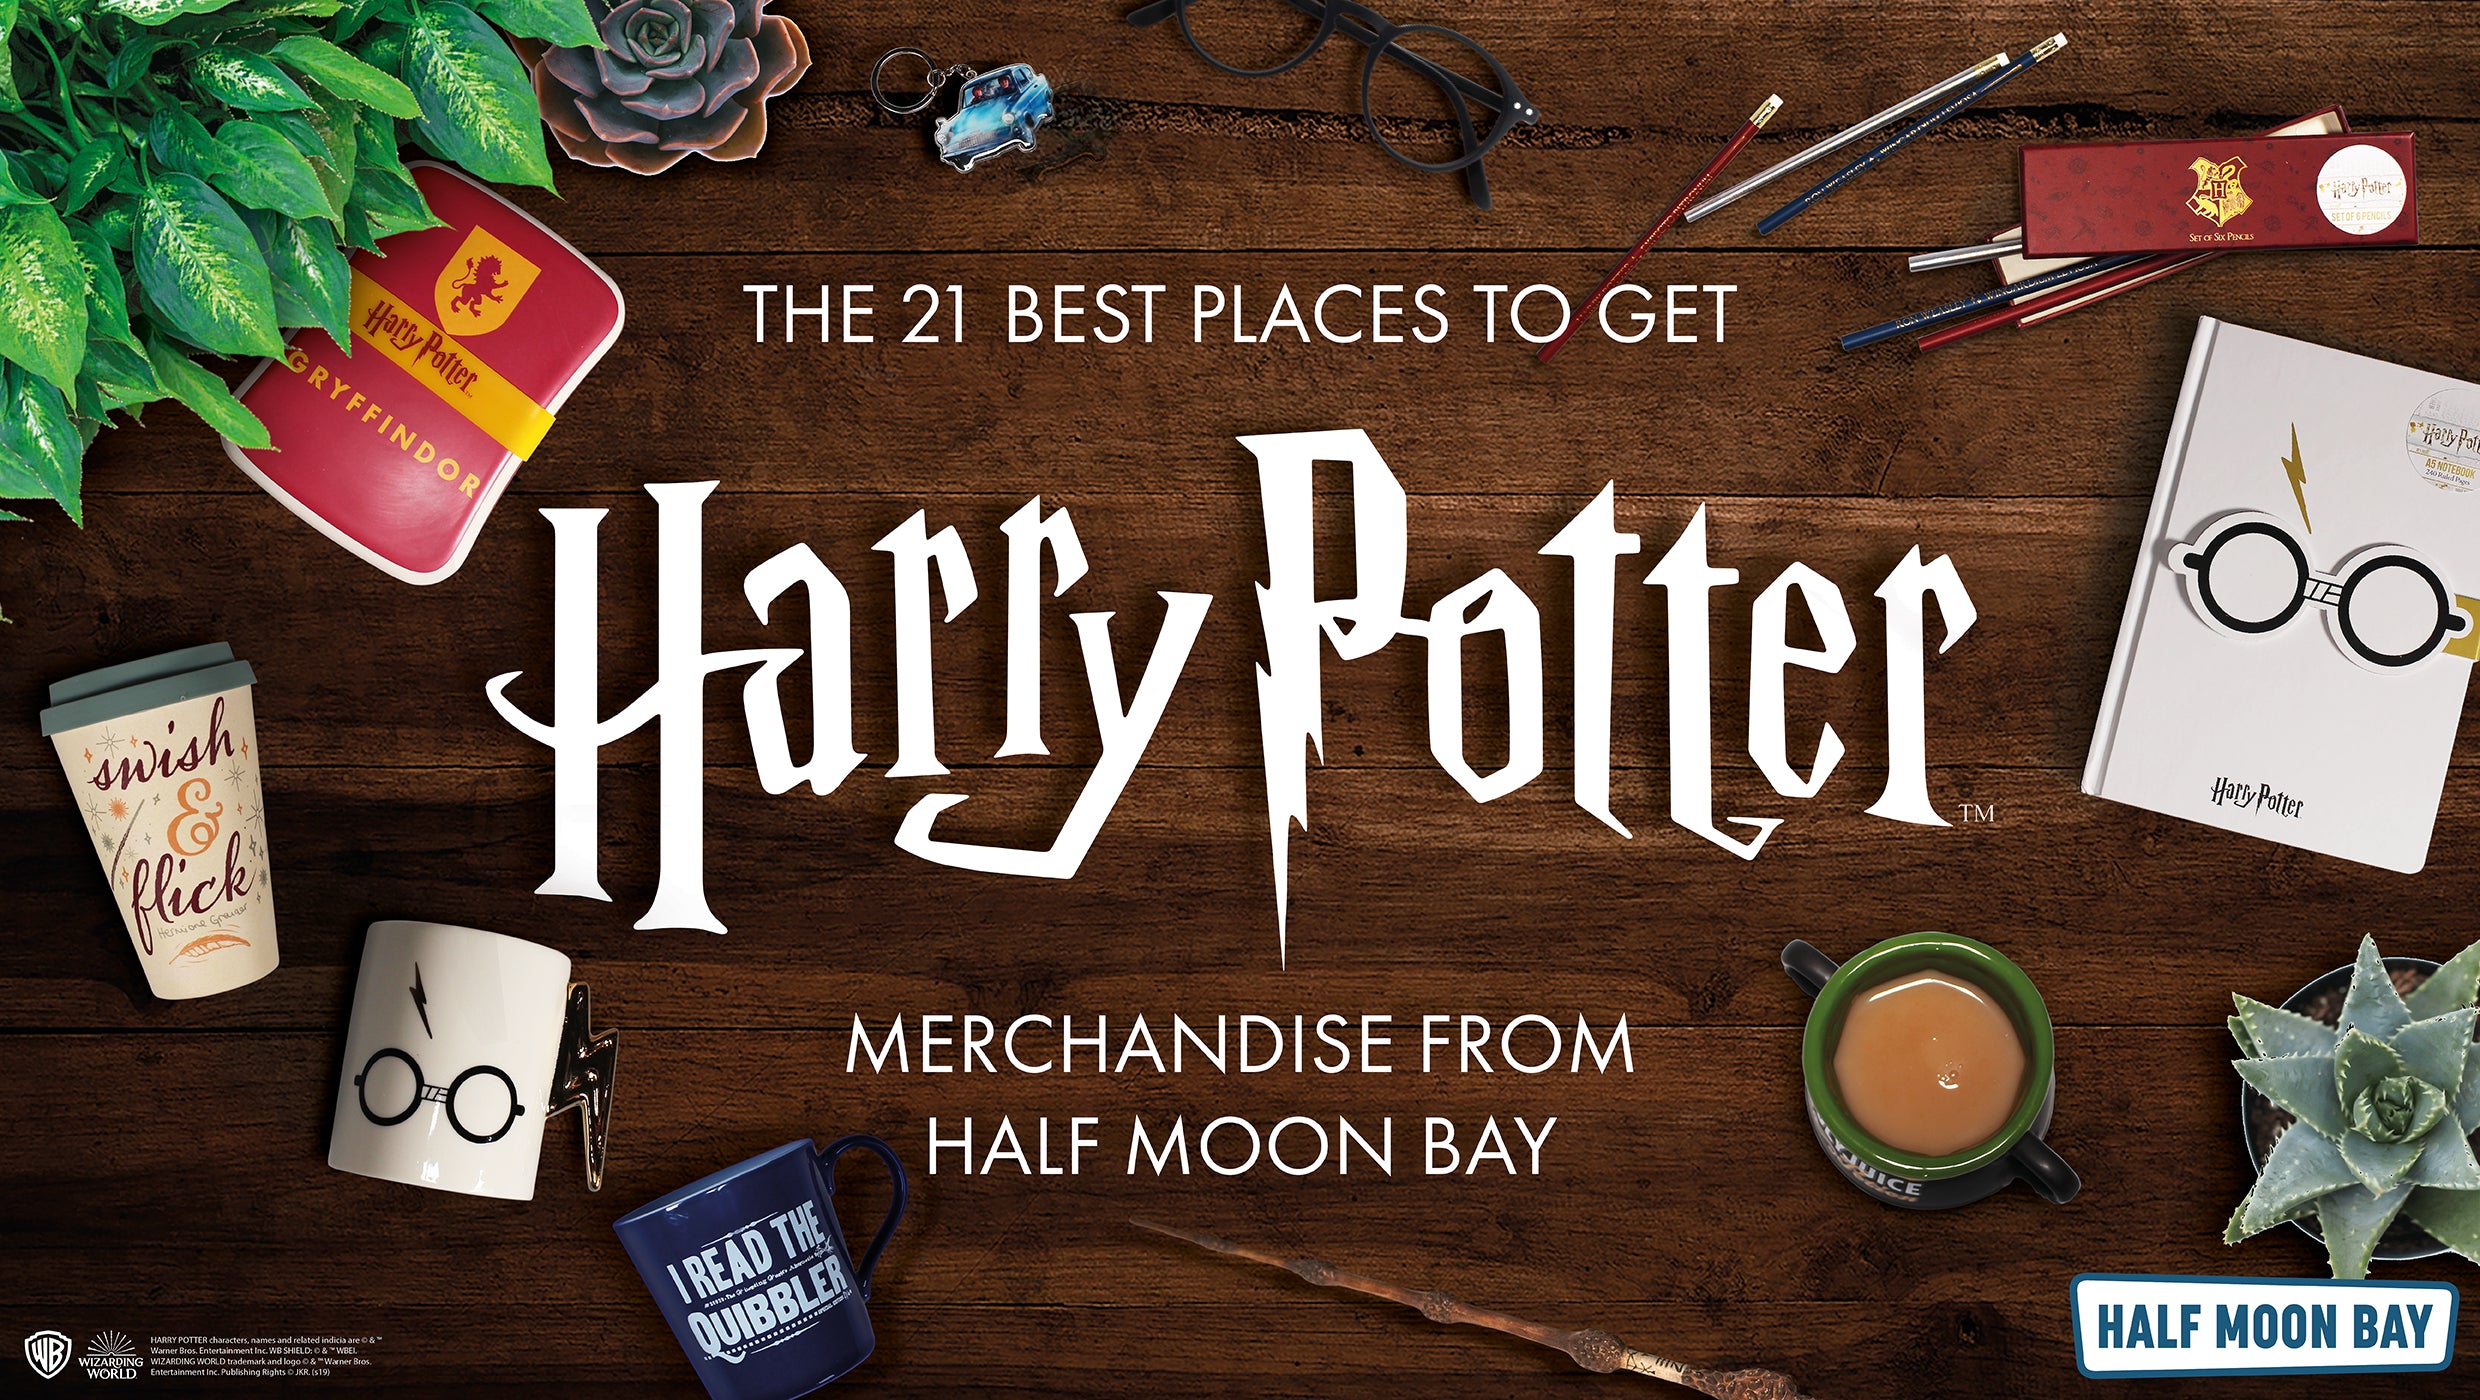 Pottermore: What's in Store for Harry Potter Fans?